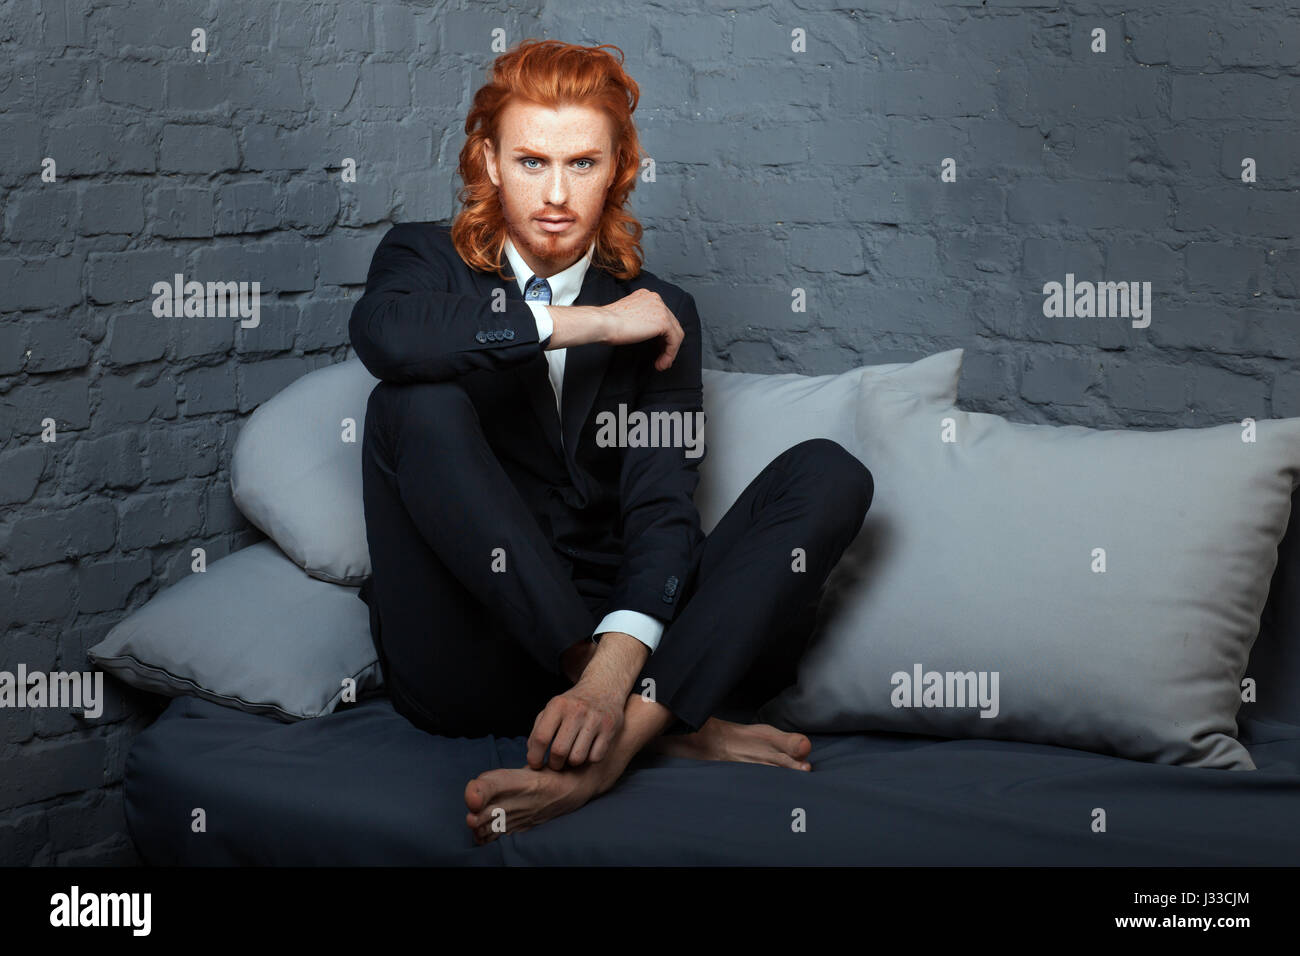 The guy with the red hair and beard, sitting on the sofa. Freckles on his face. Stock Photo